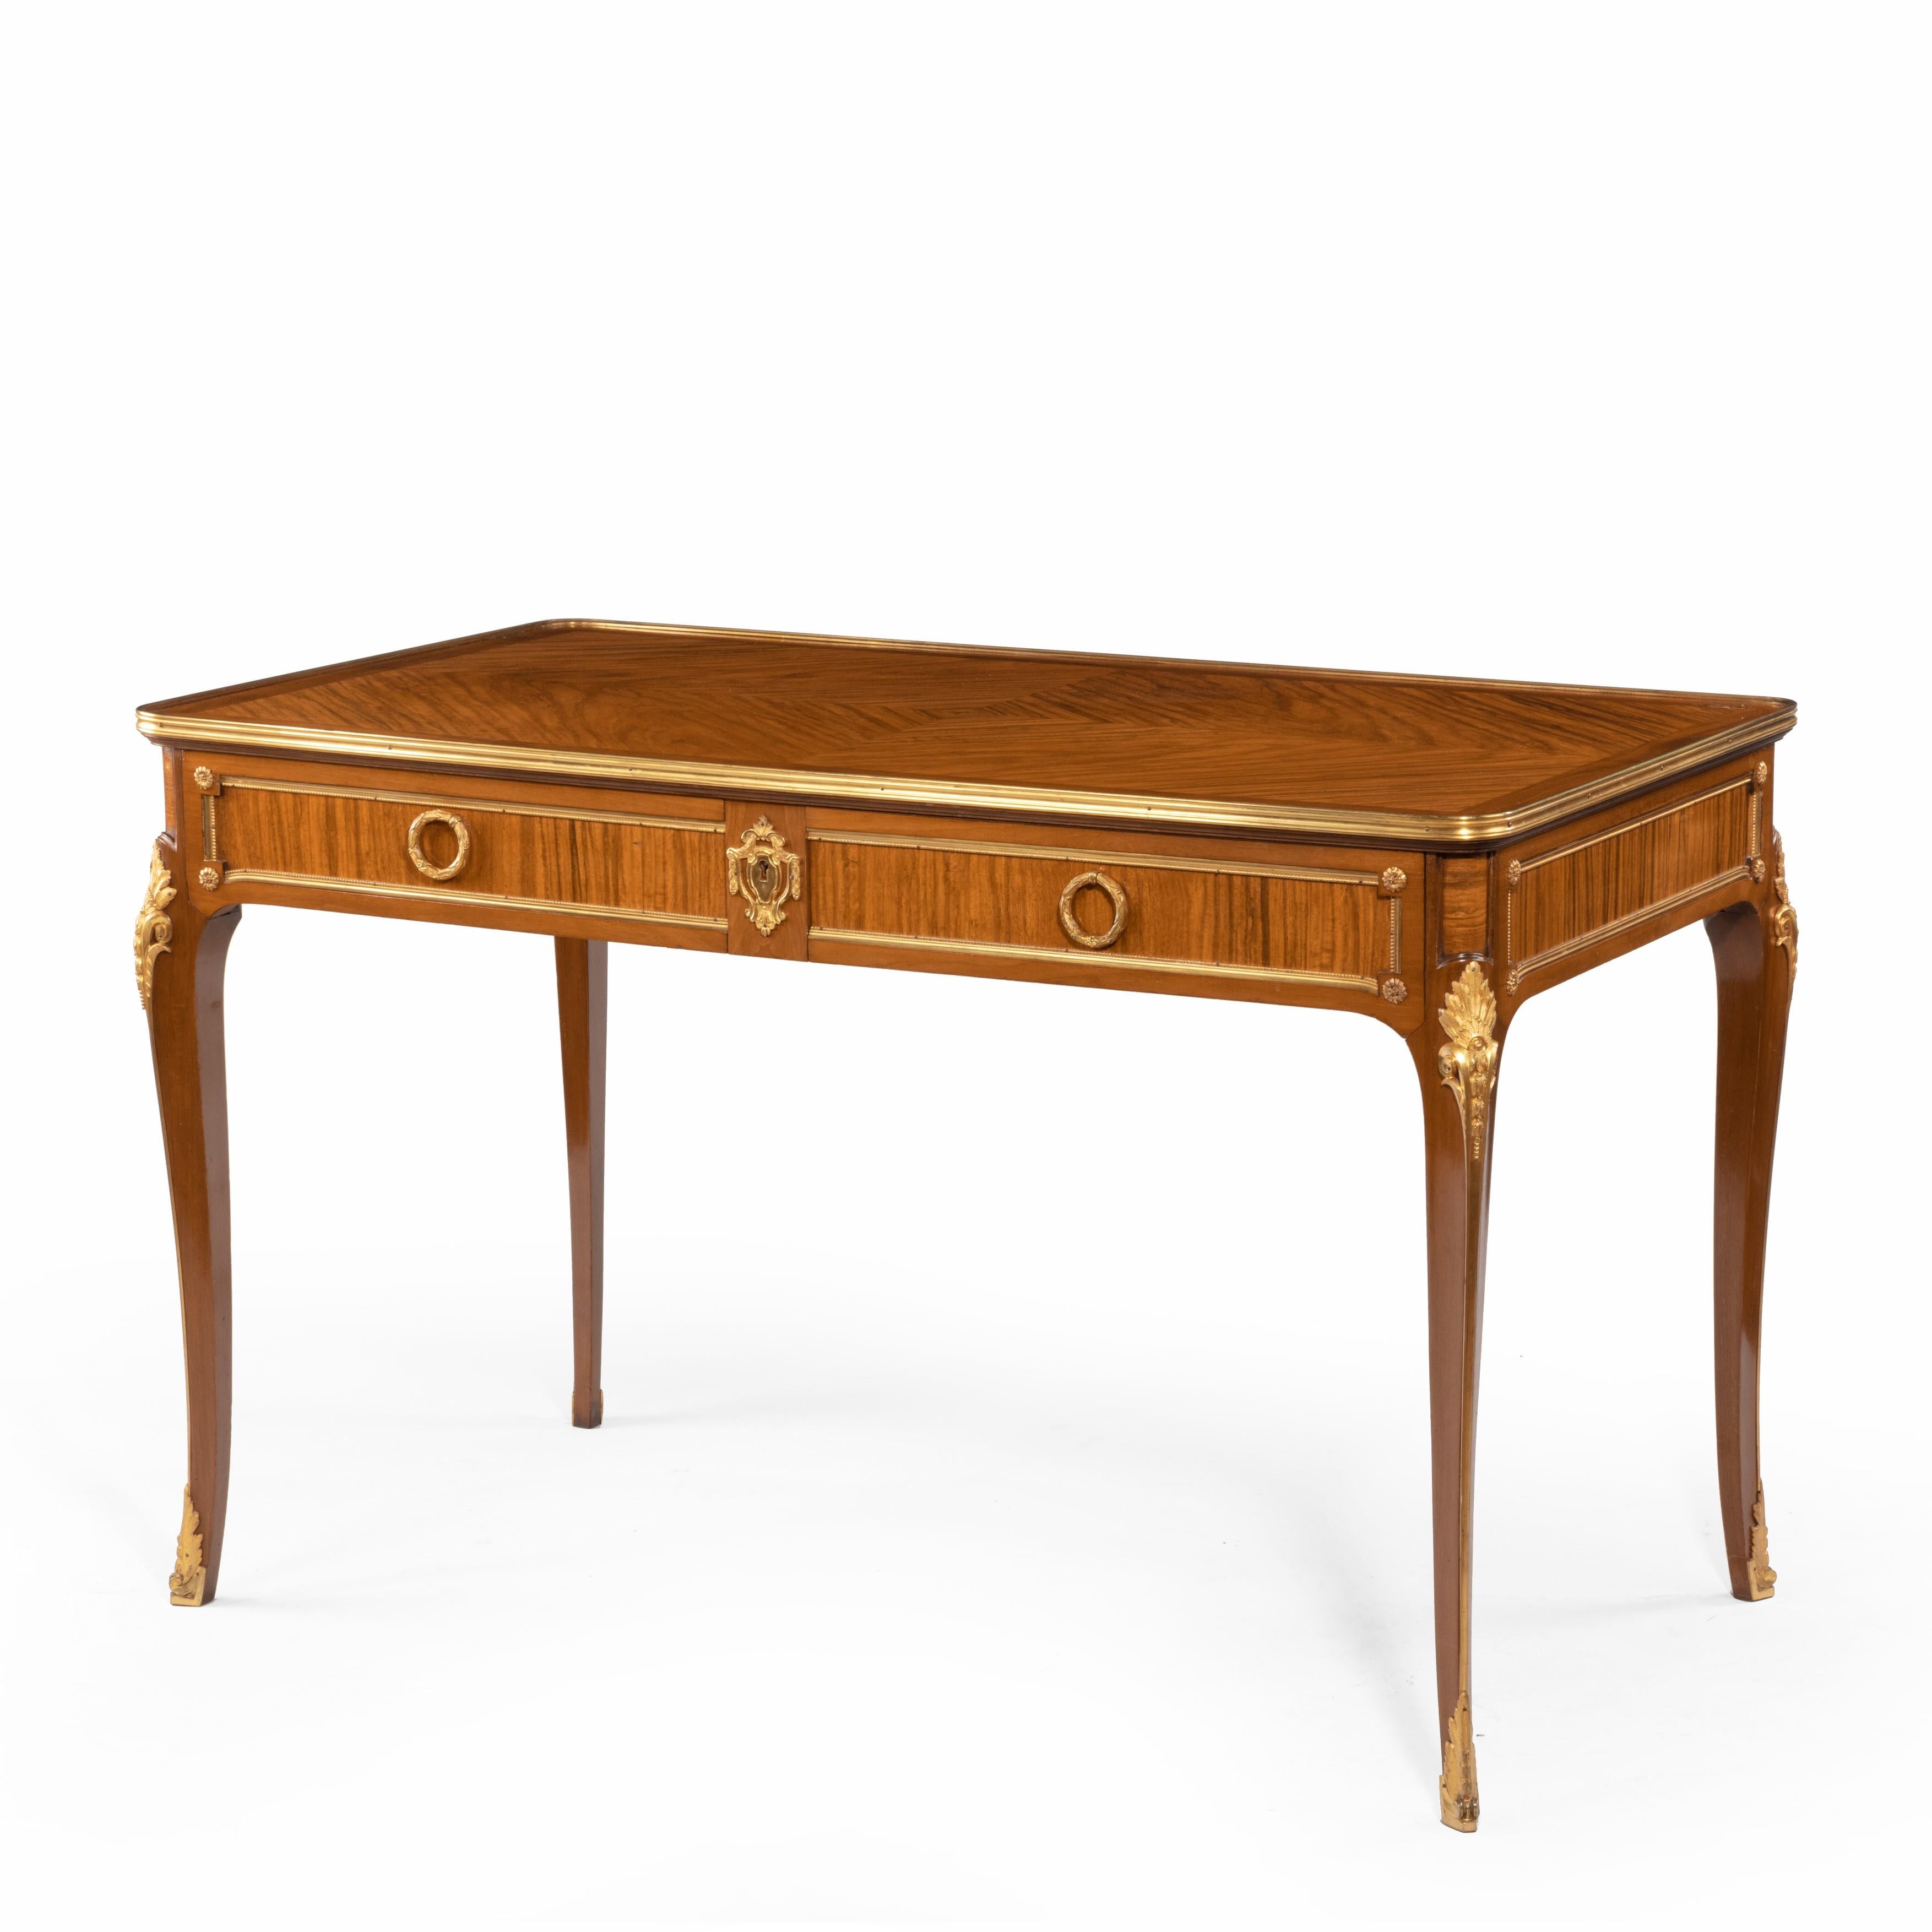 Late 19th Century Walnut Library Table by Alexandre Chevrié